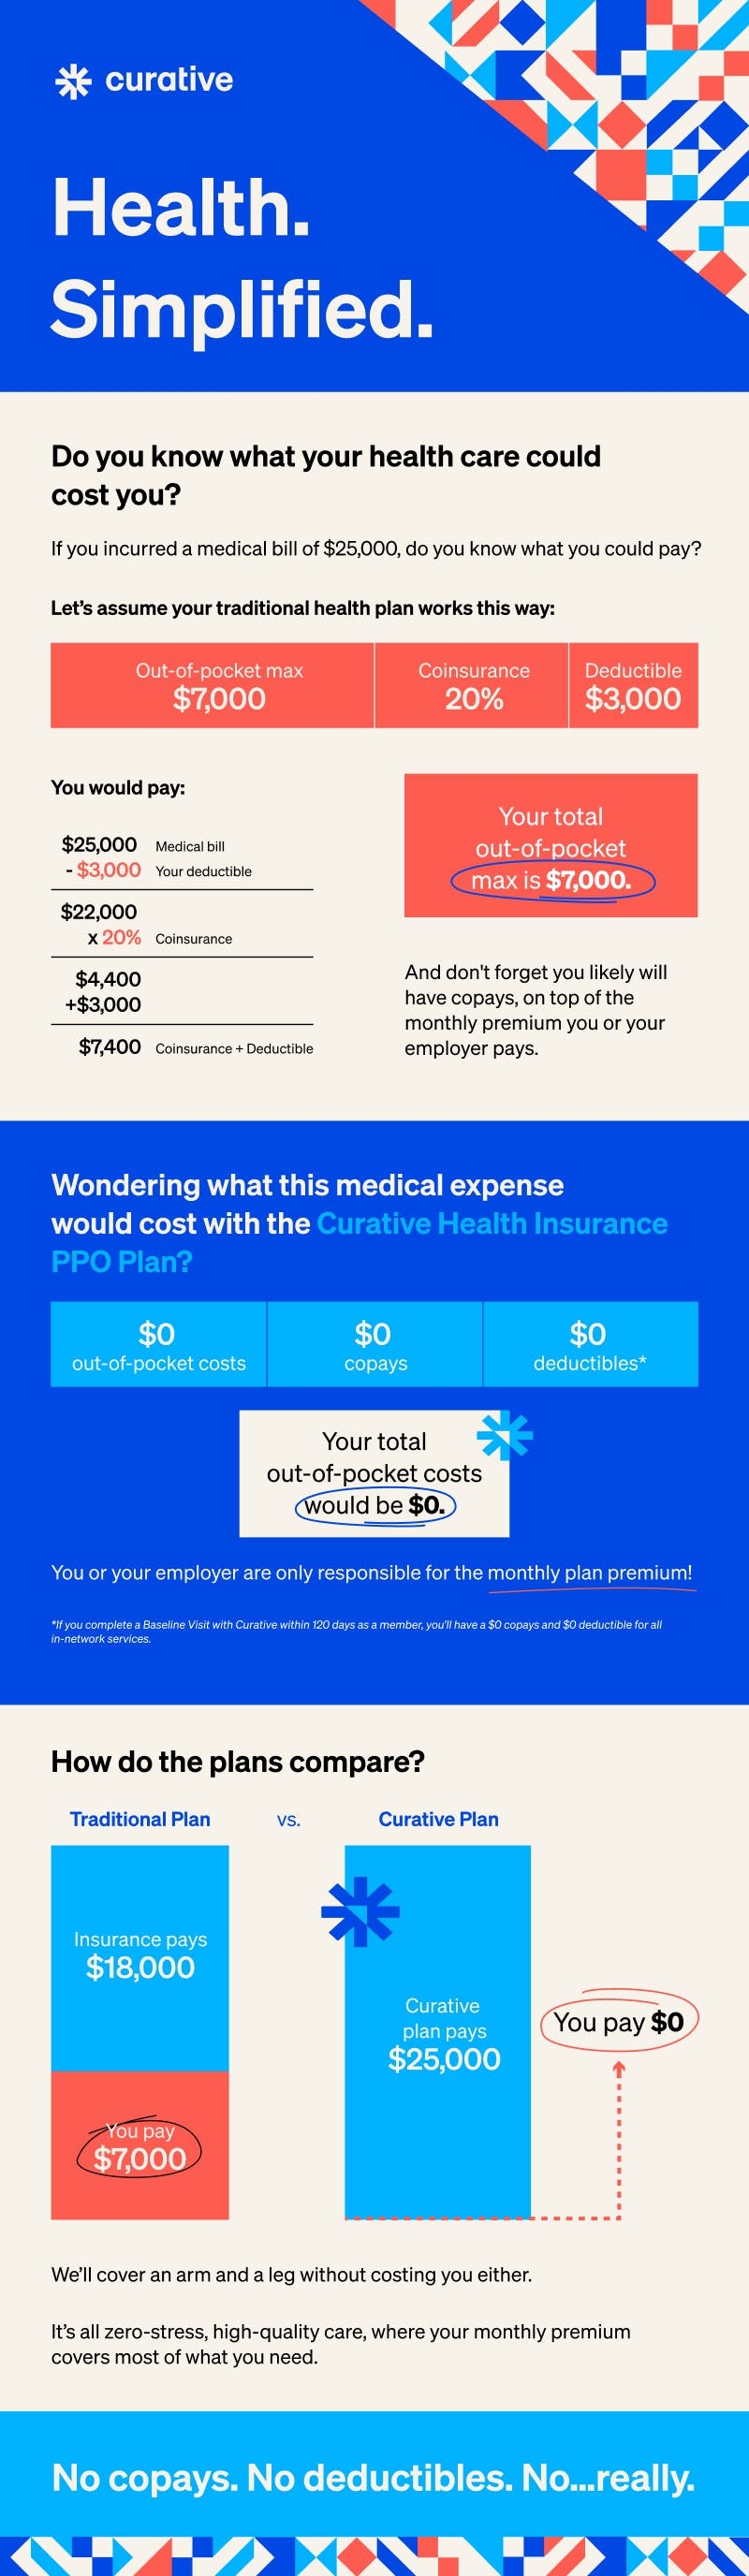 Health Care Cost Infographic